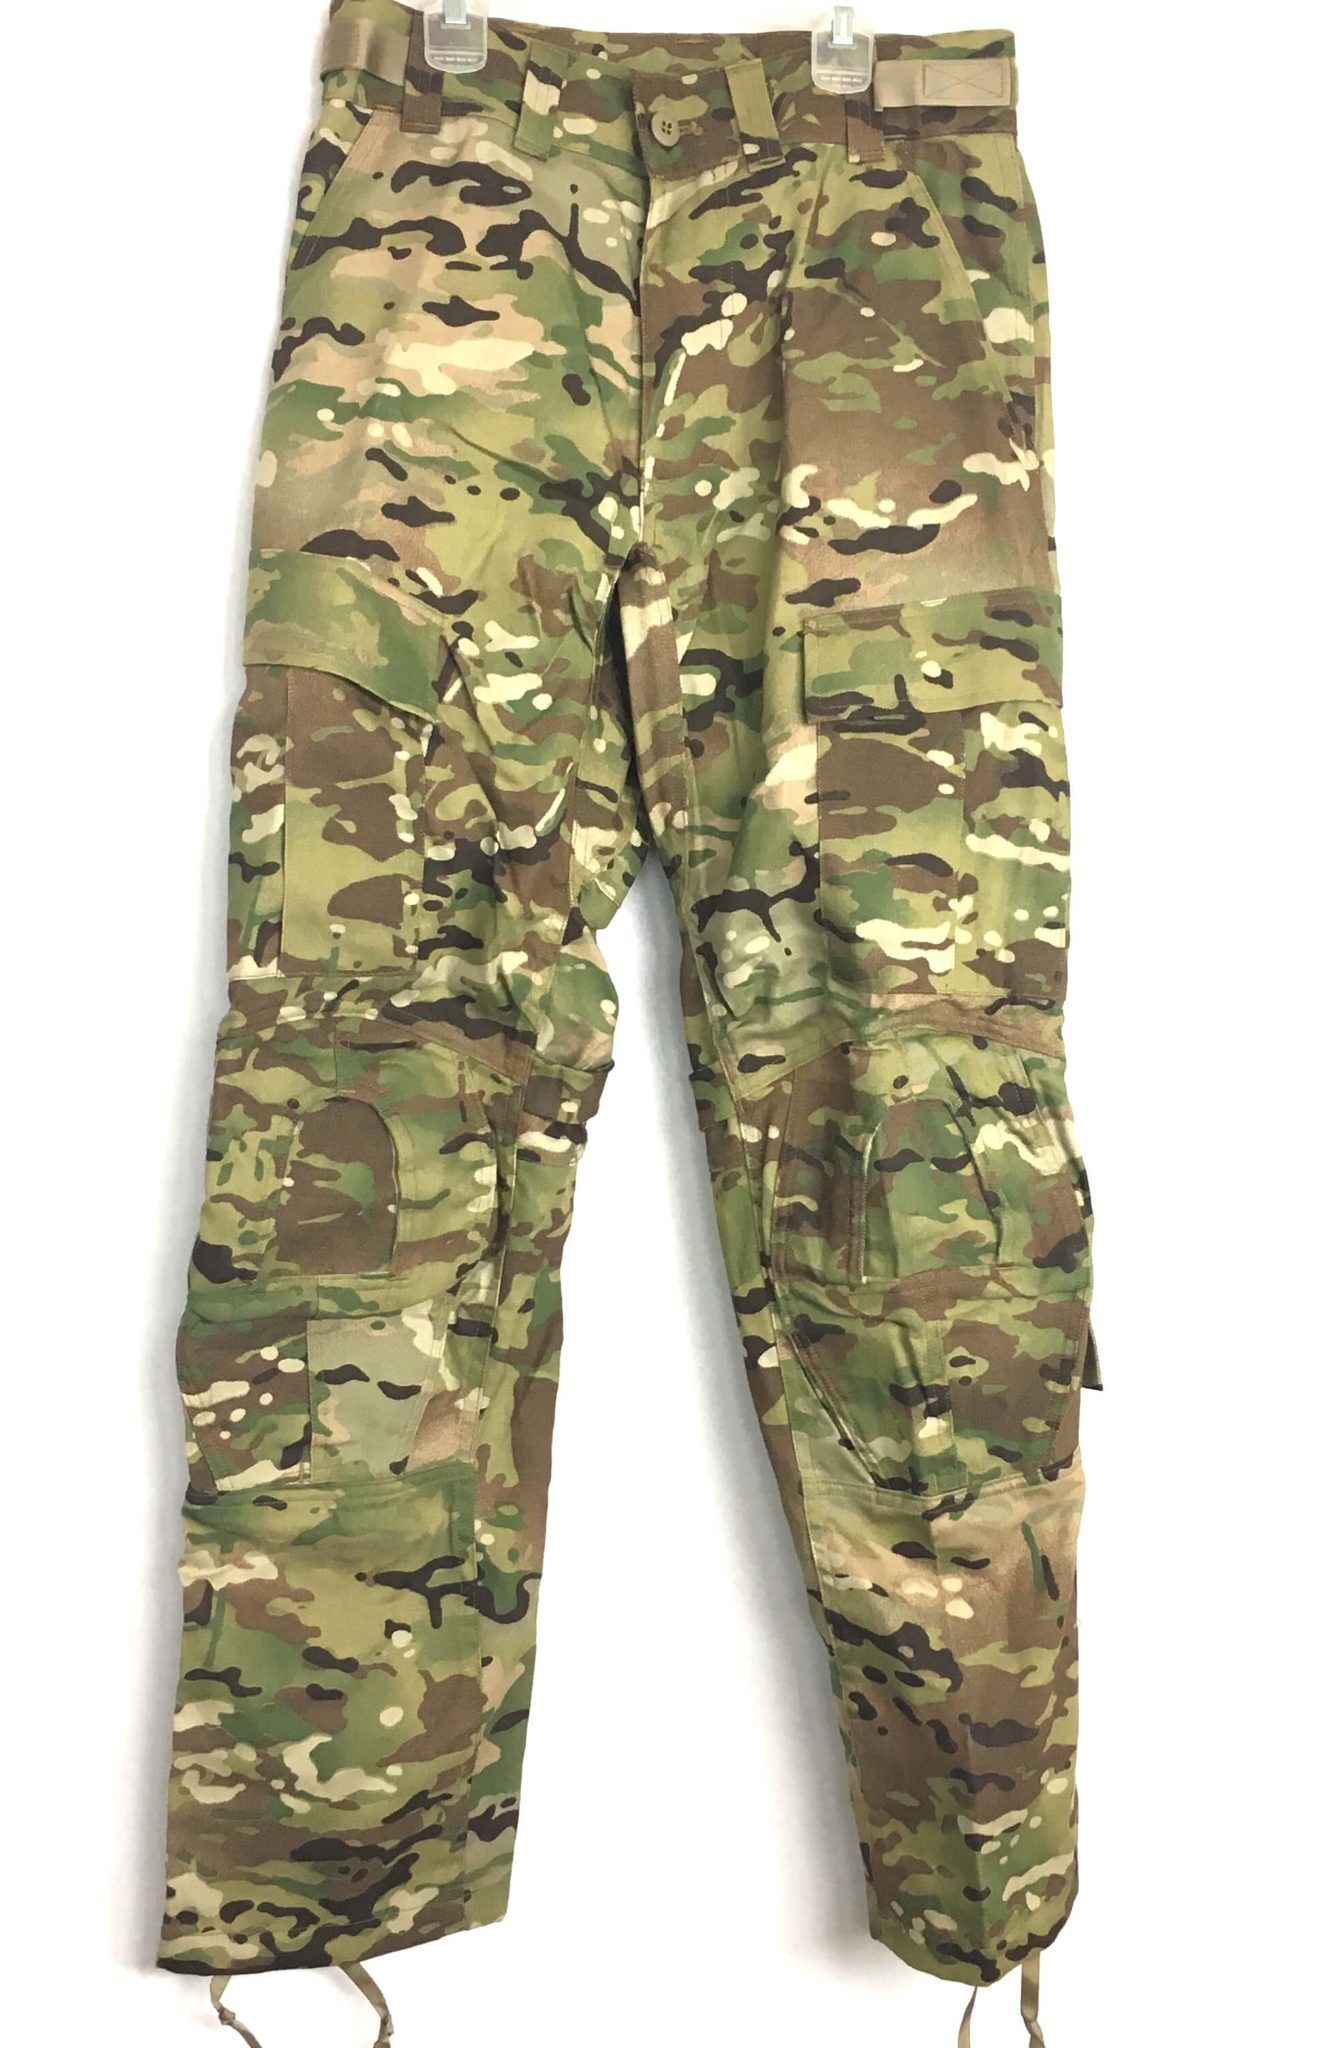 MULTICAM FLAME RESISTANT ARMY COMBAT PANT W/CRYE PRECISION KNEE PAD CUT MR NWOT 